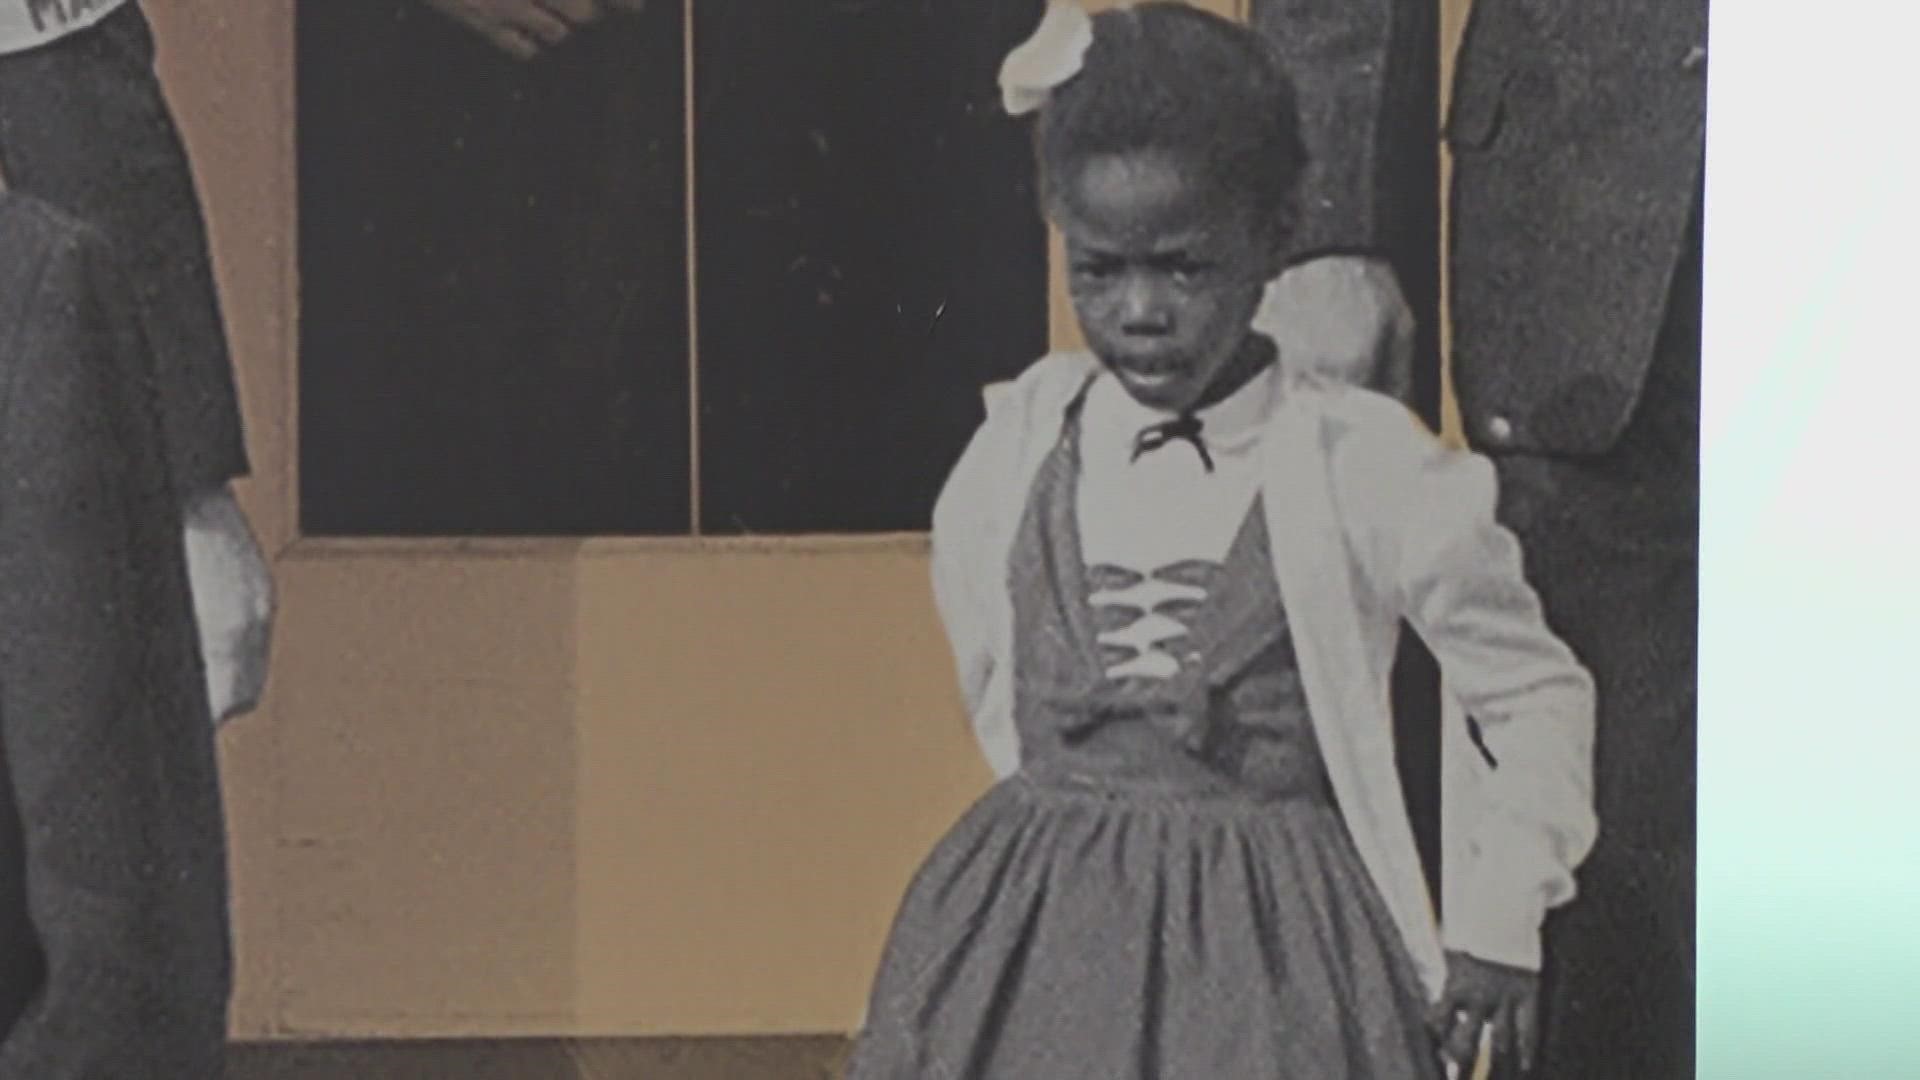 Four U.S. Marshals escorted Ruby Bridges, then six years old, into the school while angry crowds shouted and threatened her.